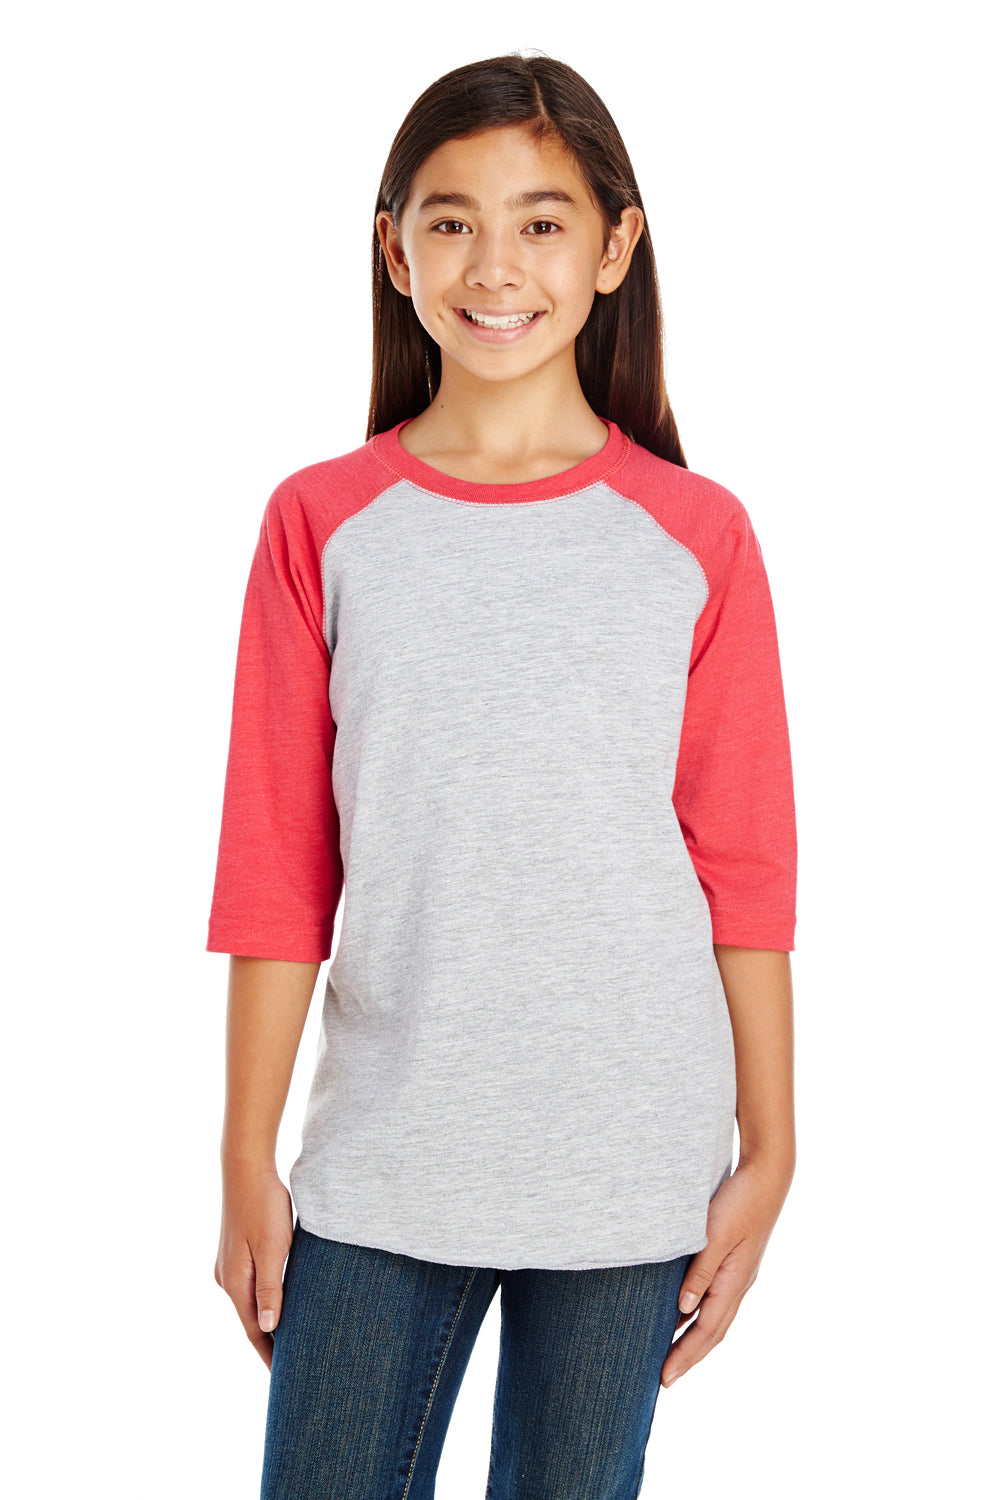 LAT 6130 Youth Fine Jersey 3/4 Sleeve Crewneck T-Shirt Heather Grey/Red Front